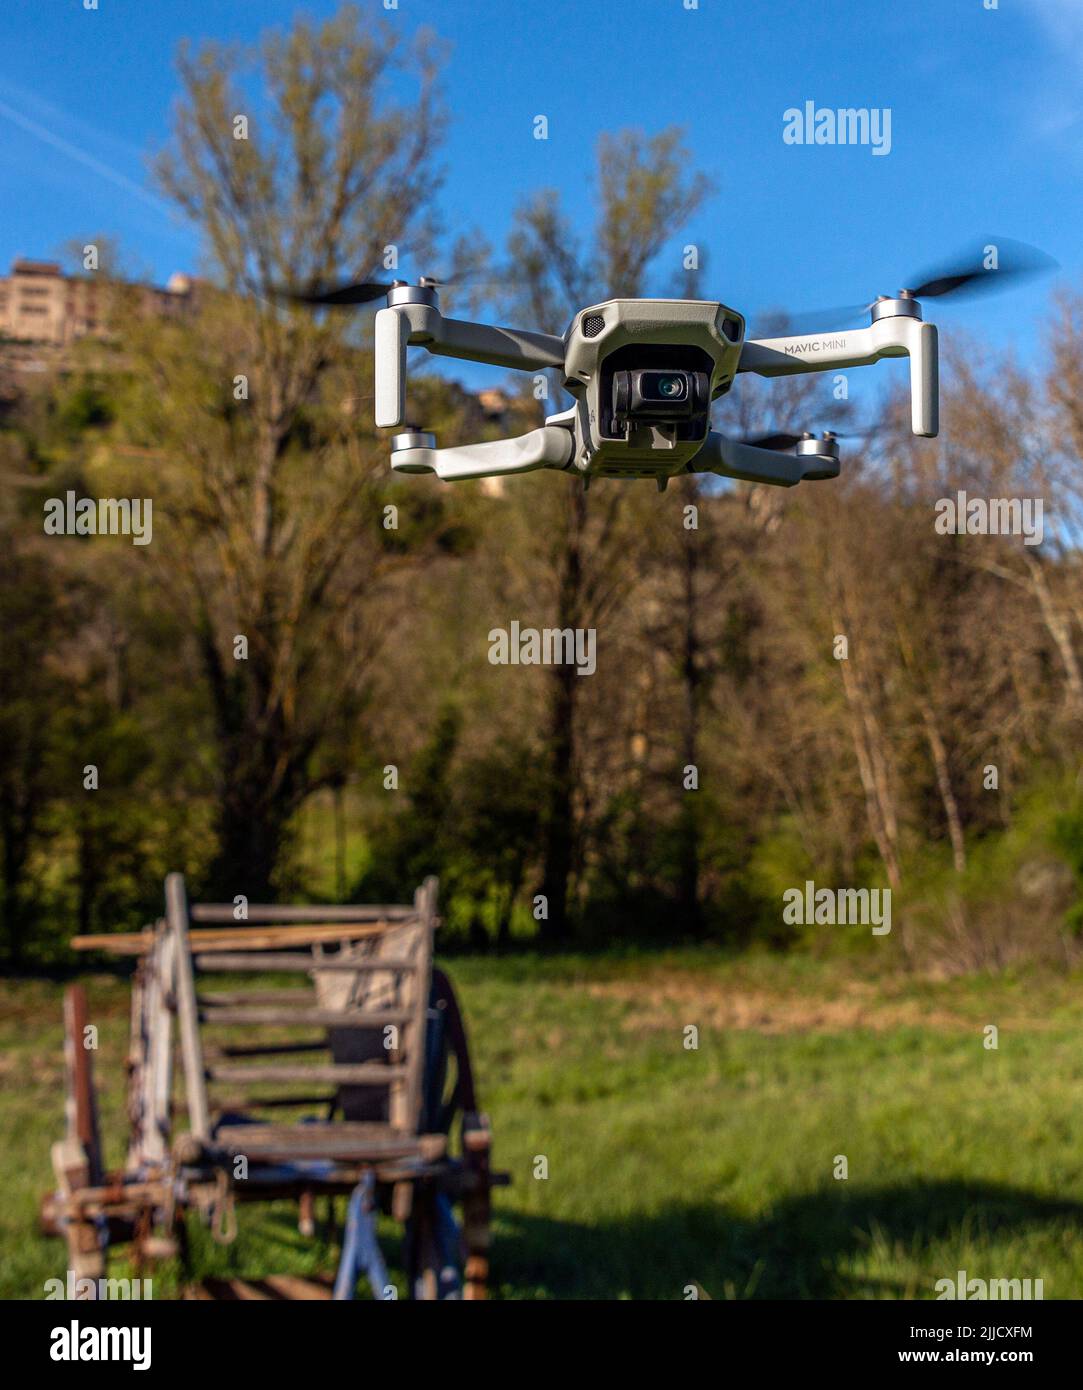 A portrait format view of a DJI Mavic Mini drone hovering above the ground. Stock Photo